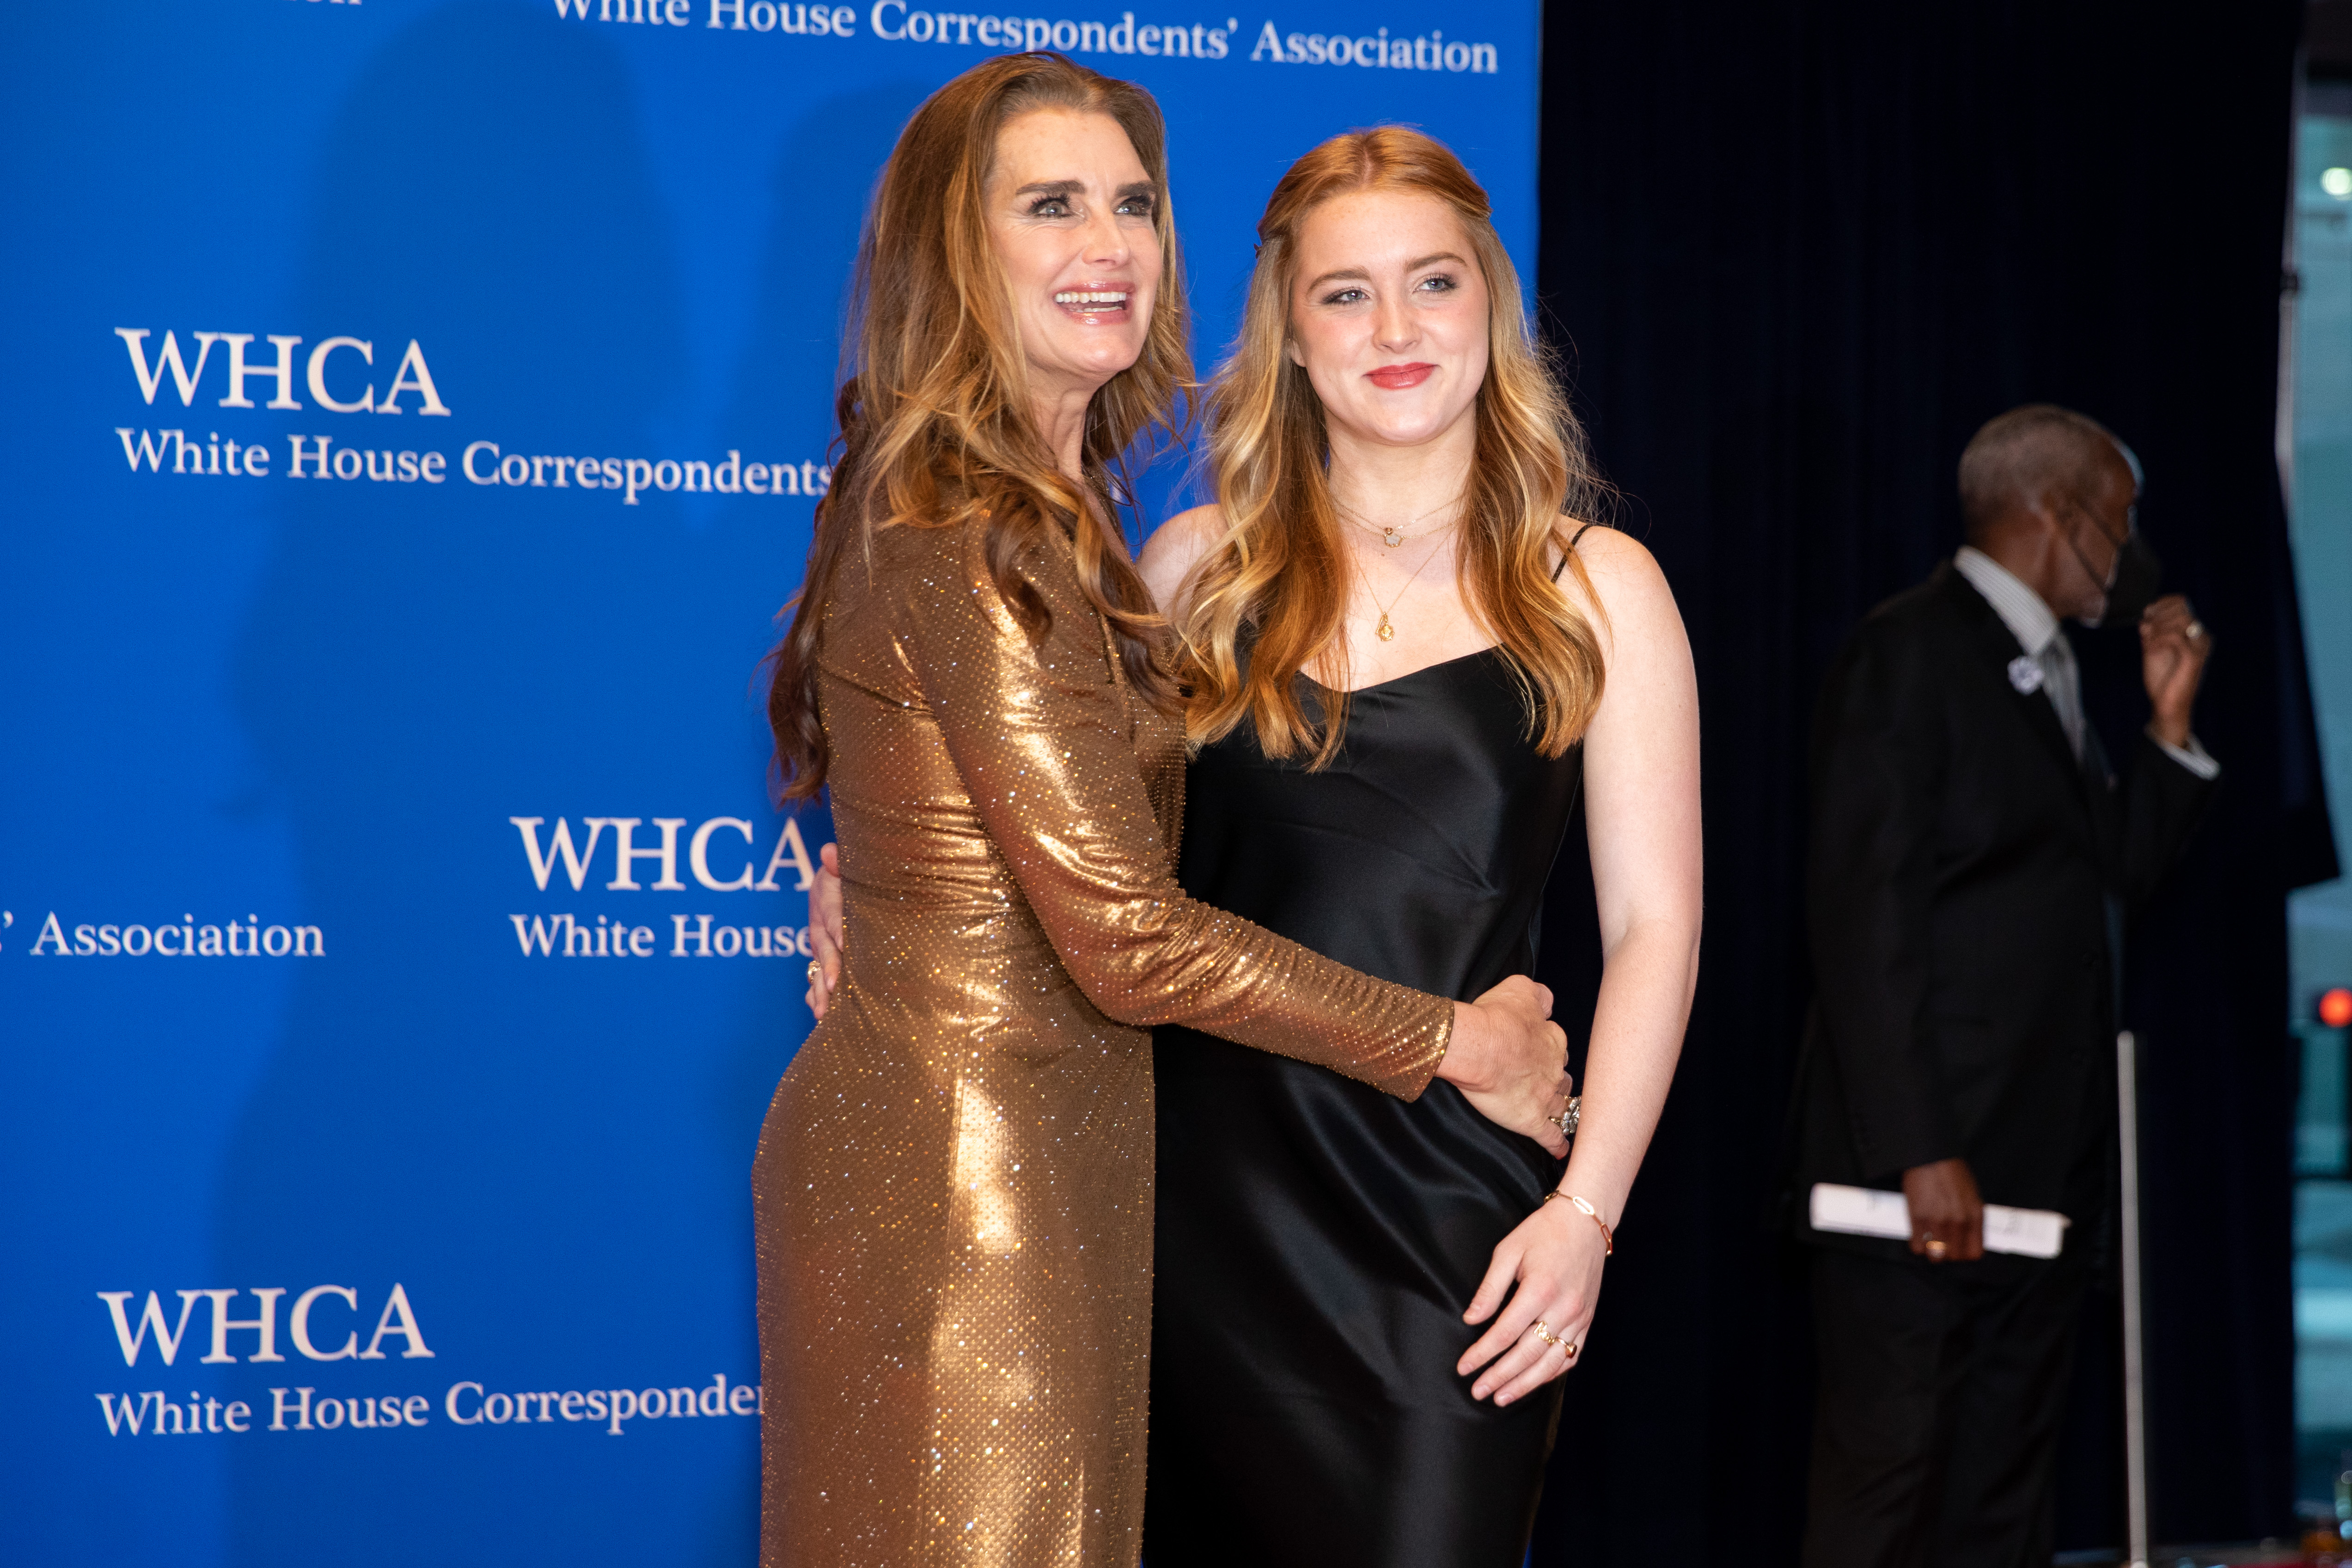 Brooke Shields and her daughter Rowan Shields on the red carpet of the White House Correspondents Dinner at the Washington Hilton in Washington, D.C. on April 30, 2022 | Source: Getty Images